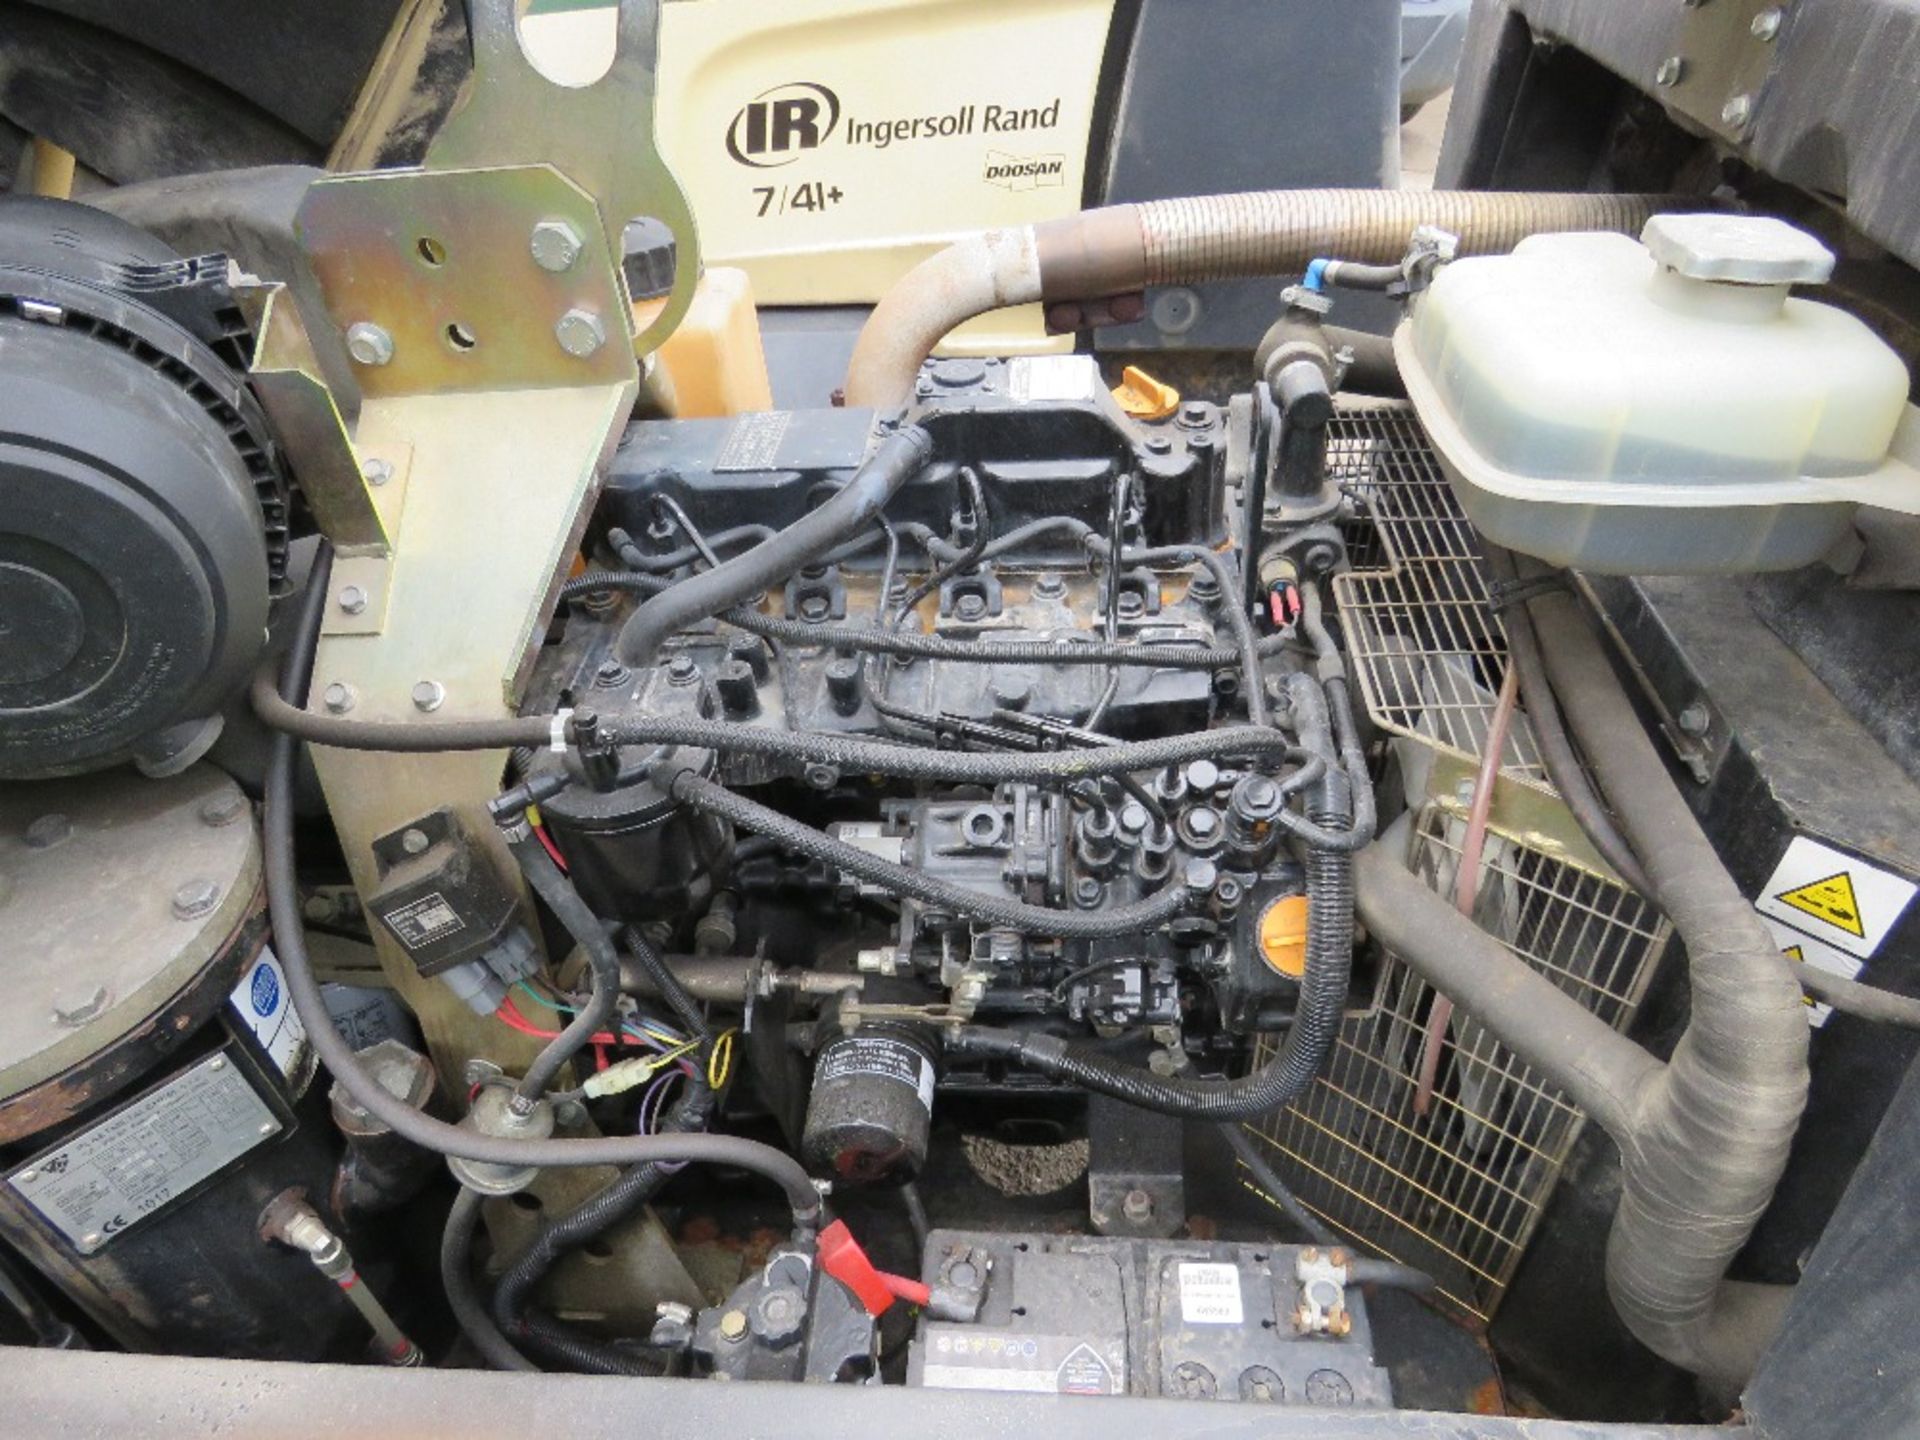 INGERSOLL RAND 741+ TOWED COMPRESSOR, YEAR 2011 BUILD. 1169 REC HOURS. SN:UN571FXXBY430386. WHEN TE - Image 7 of 8